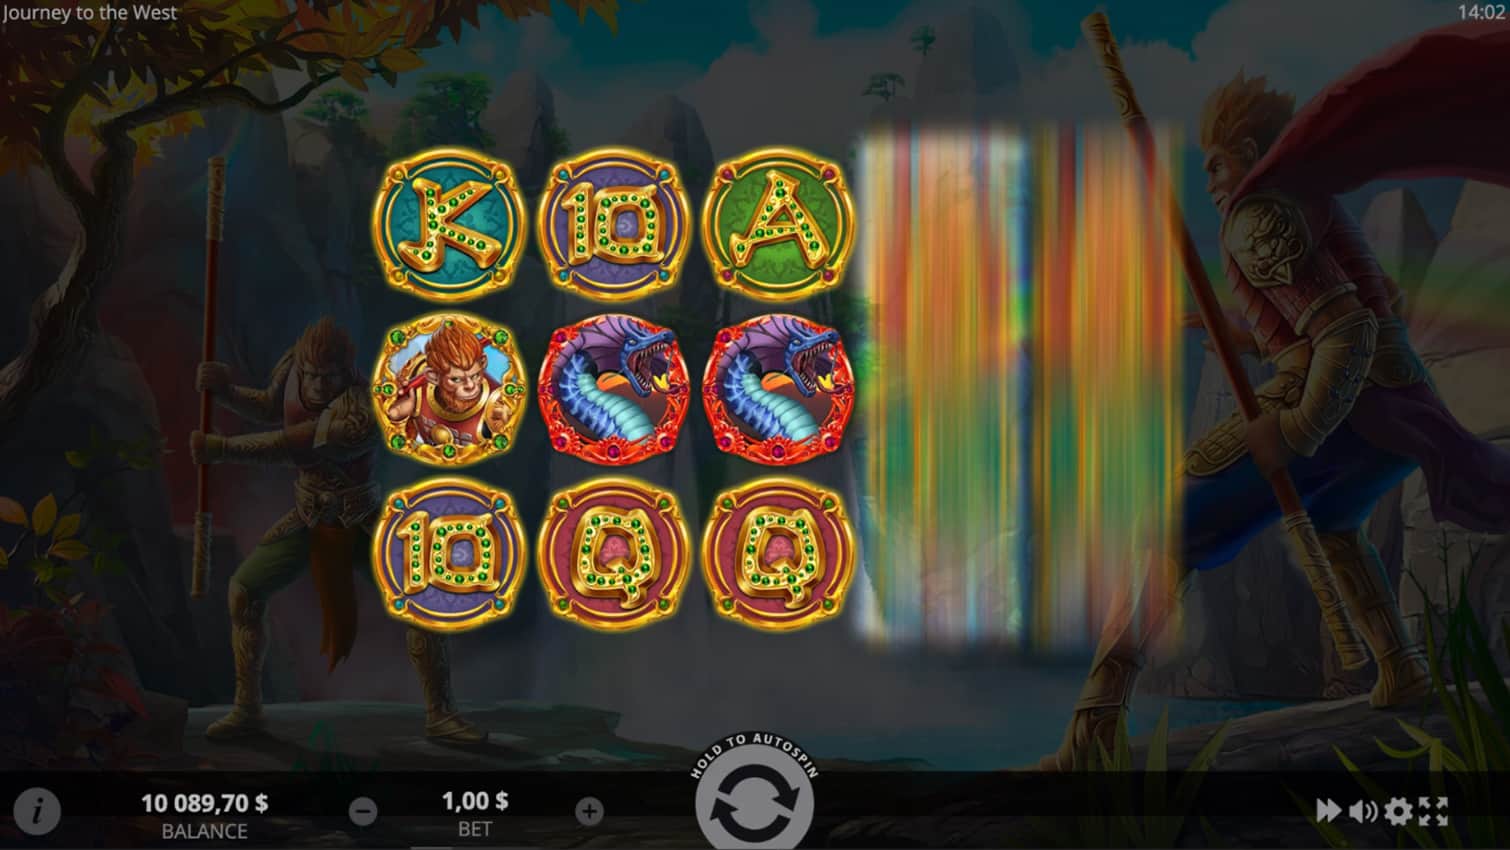 JOURNEY TO THE WEST Slot PG ทางเข้า